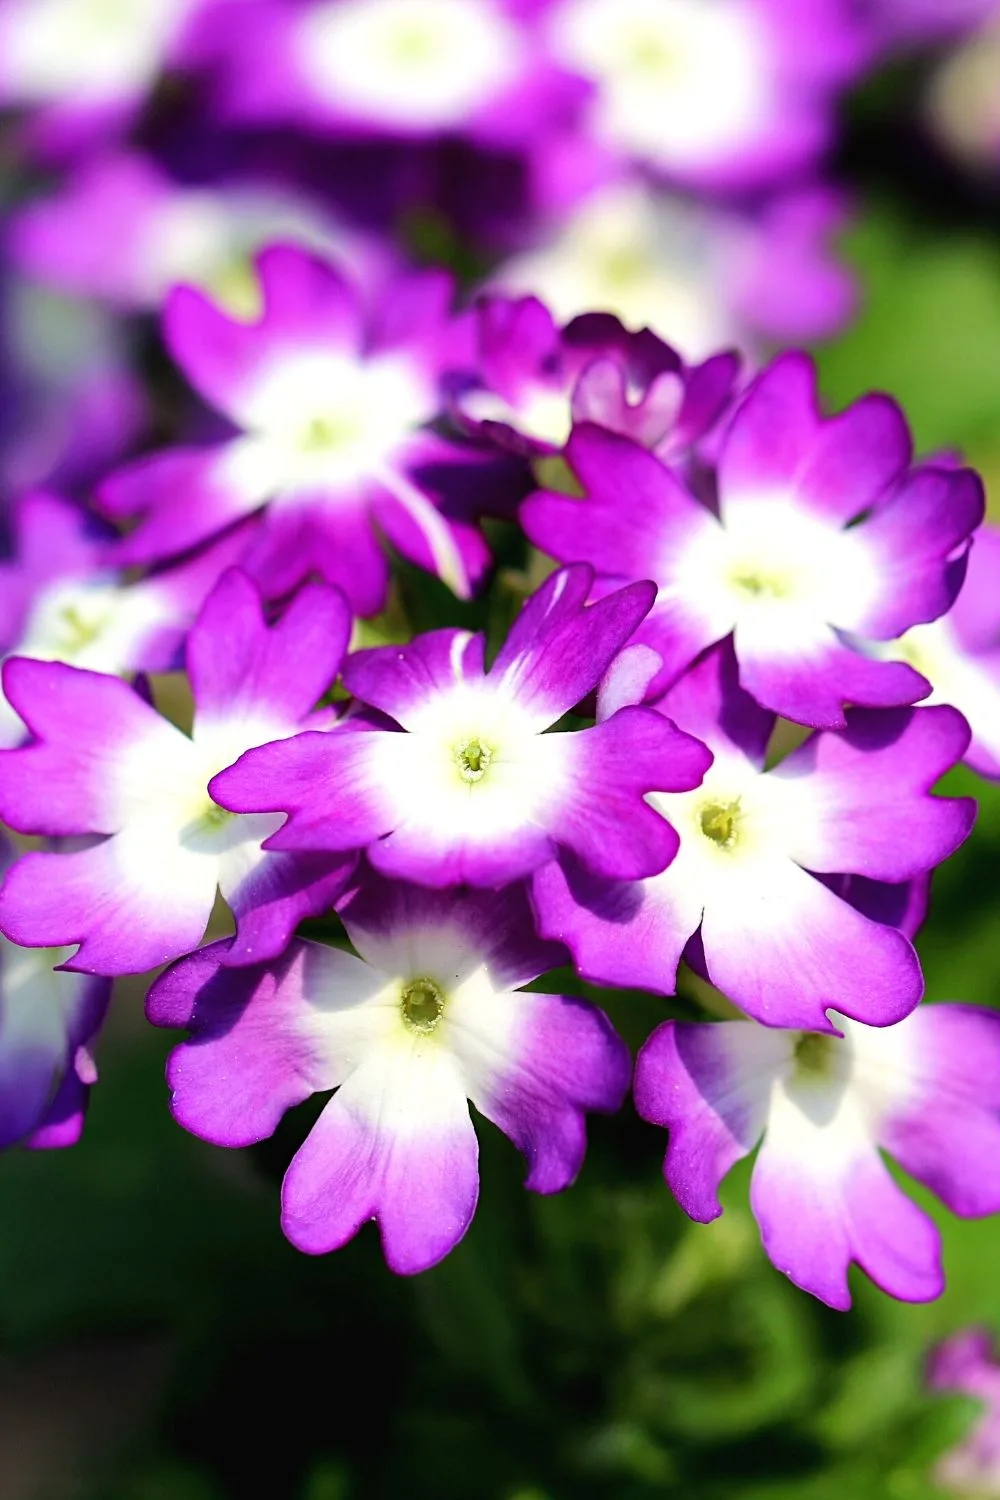 Verbena is a purple-colored plant that's commonly used to treat respiratory diseases, can be grown on an east-facing balcony